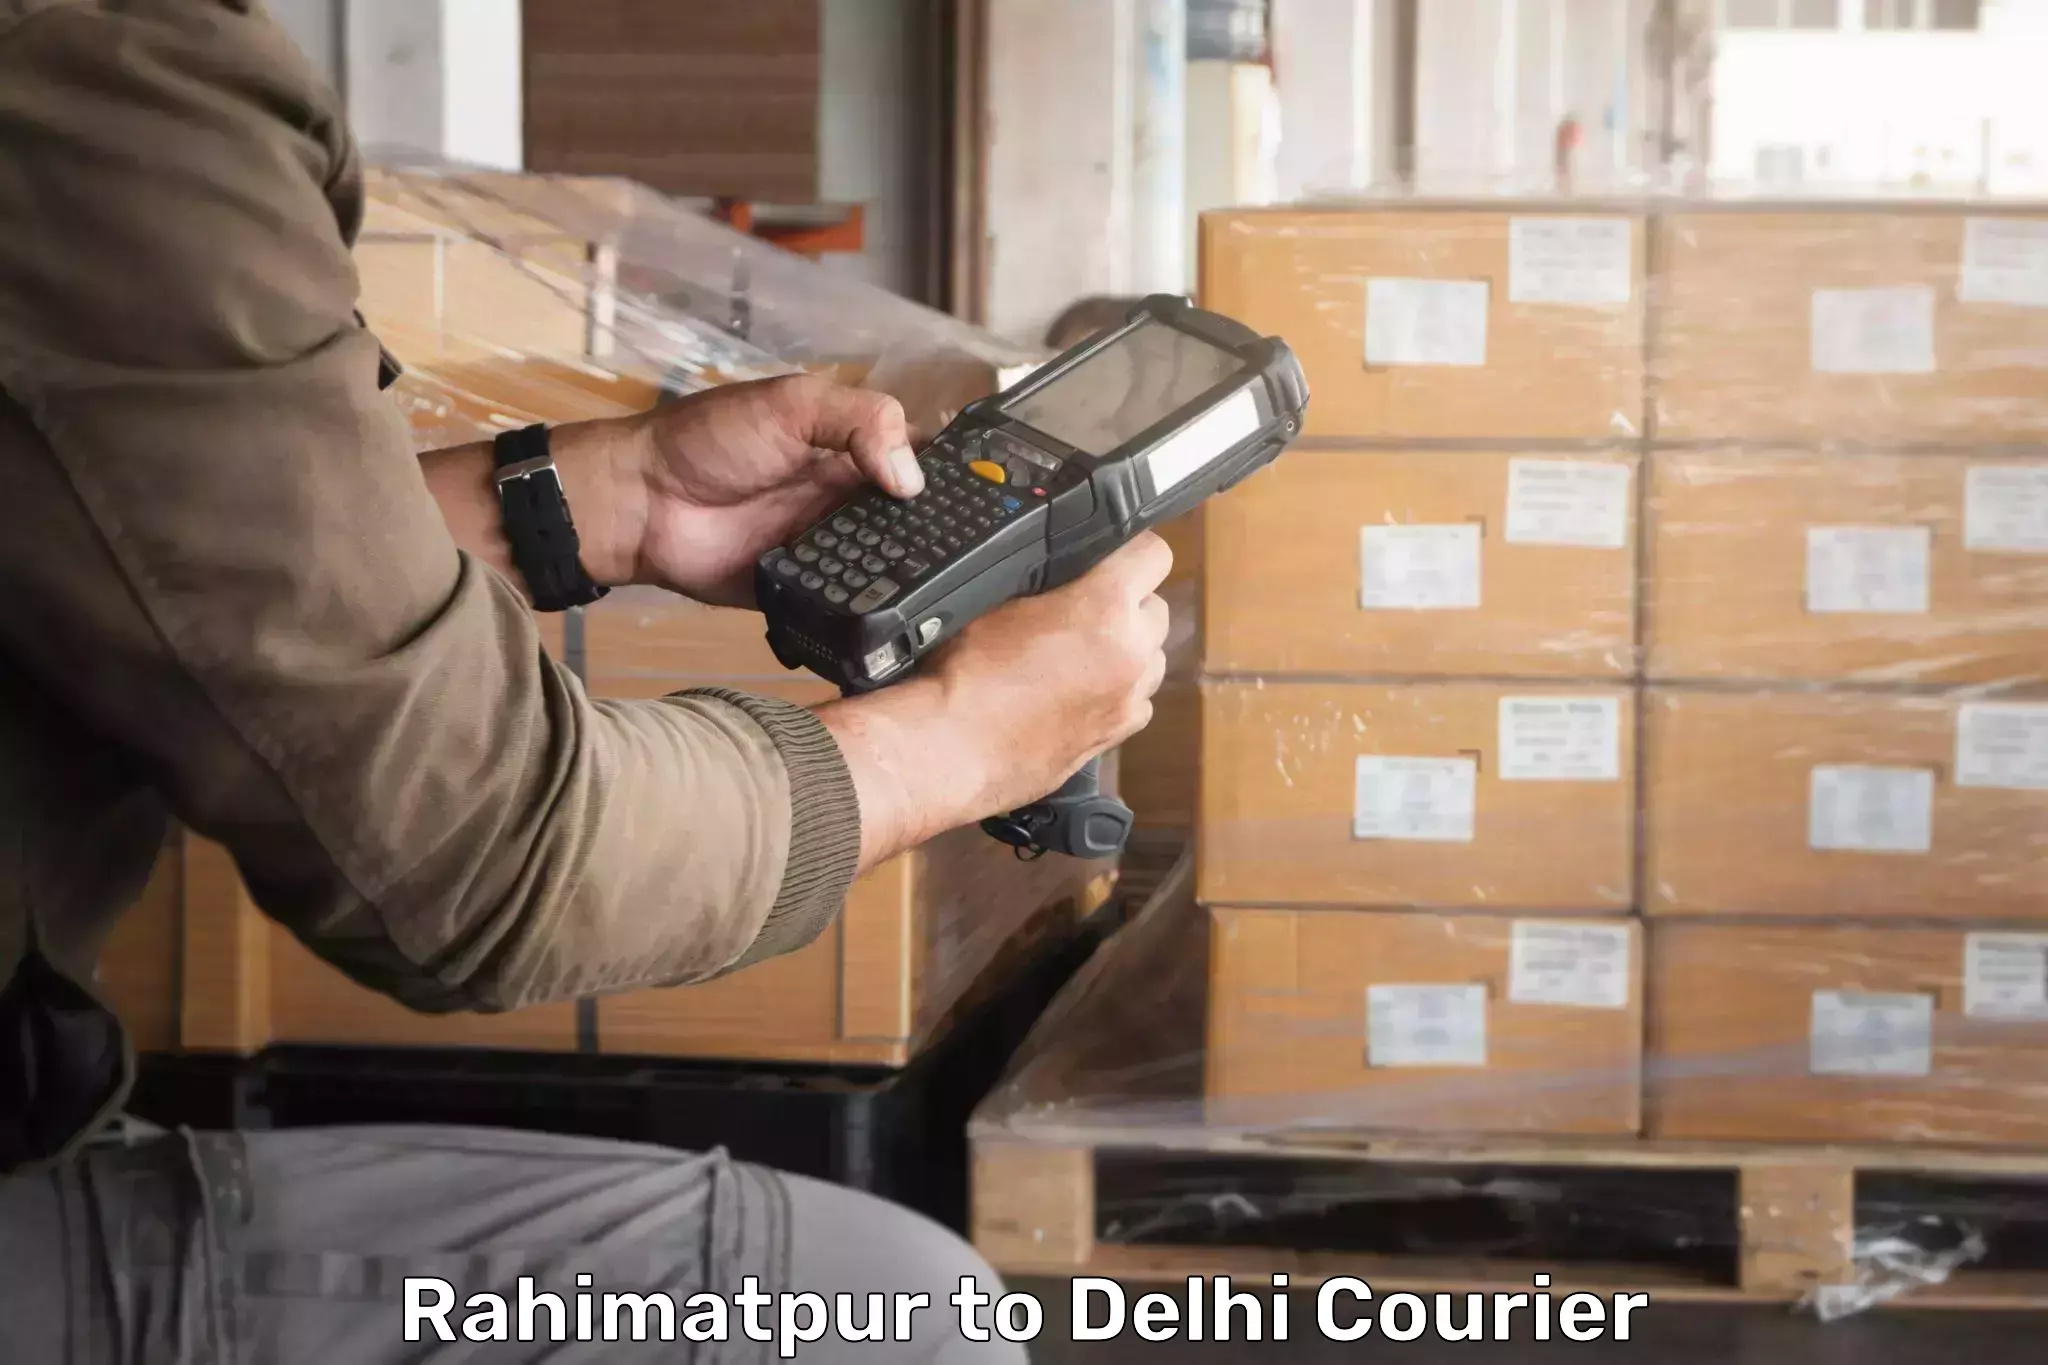 State-of-the-art courier technology Rahimatpur to IIT Delhi